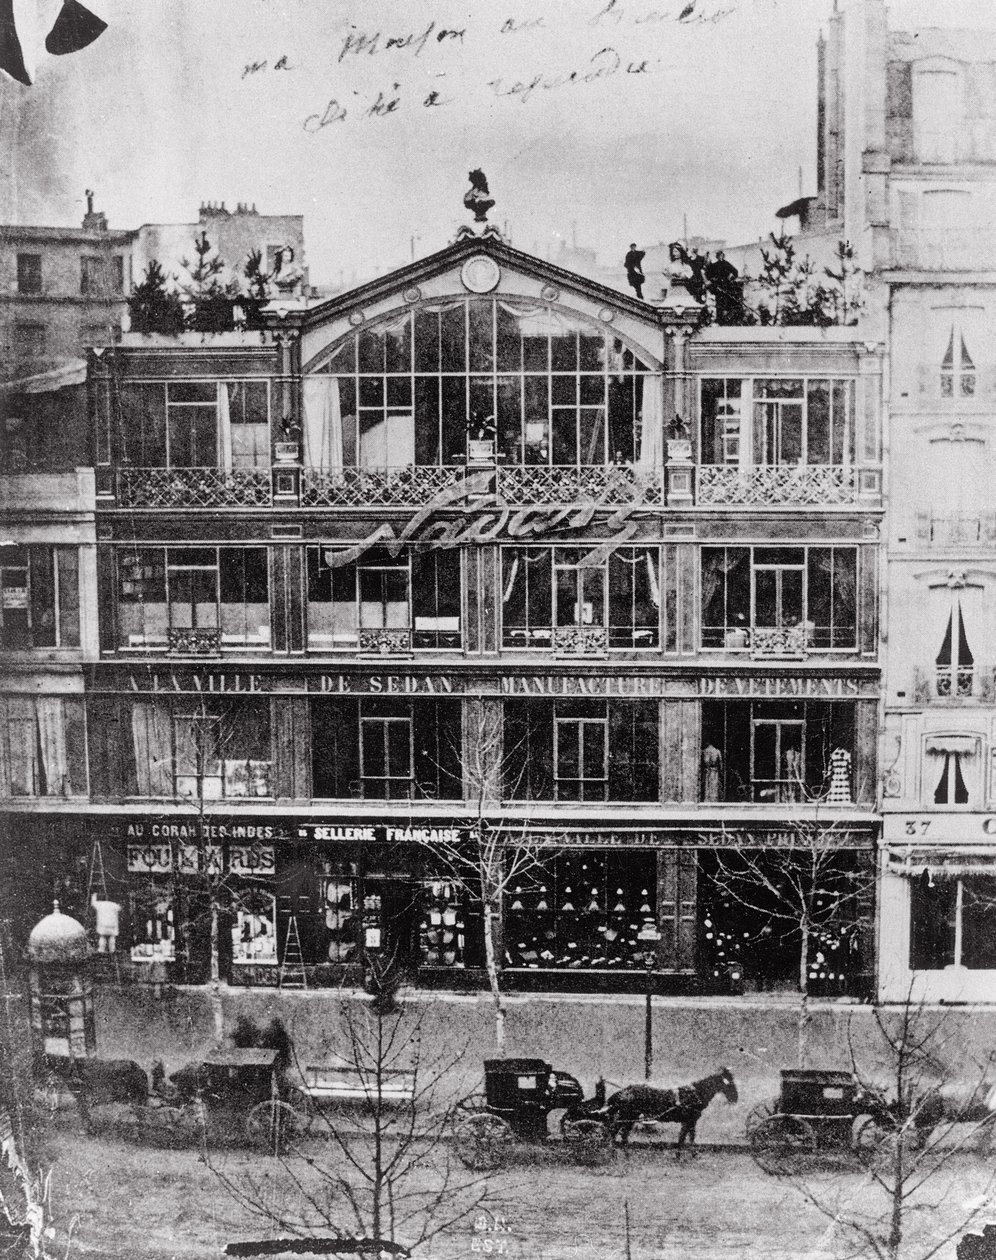 A Parisian storefront with horse and buggy in black and white photograph.